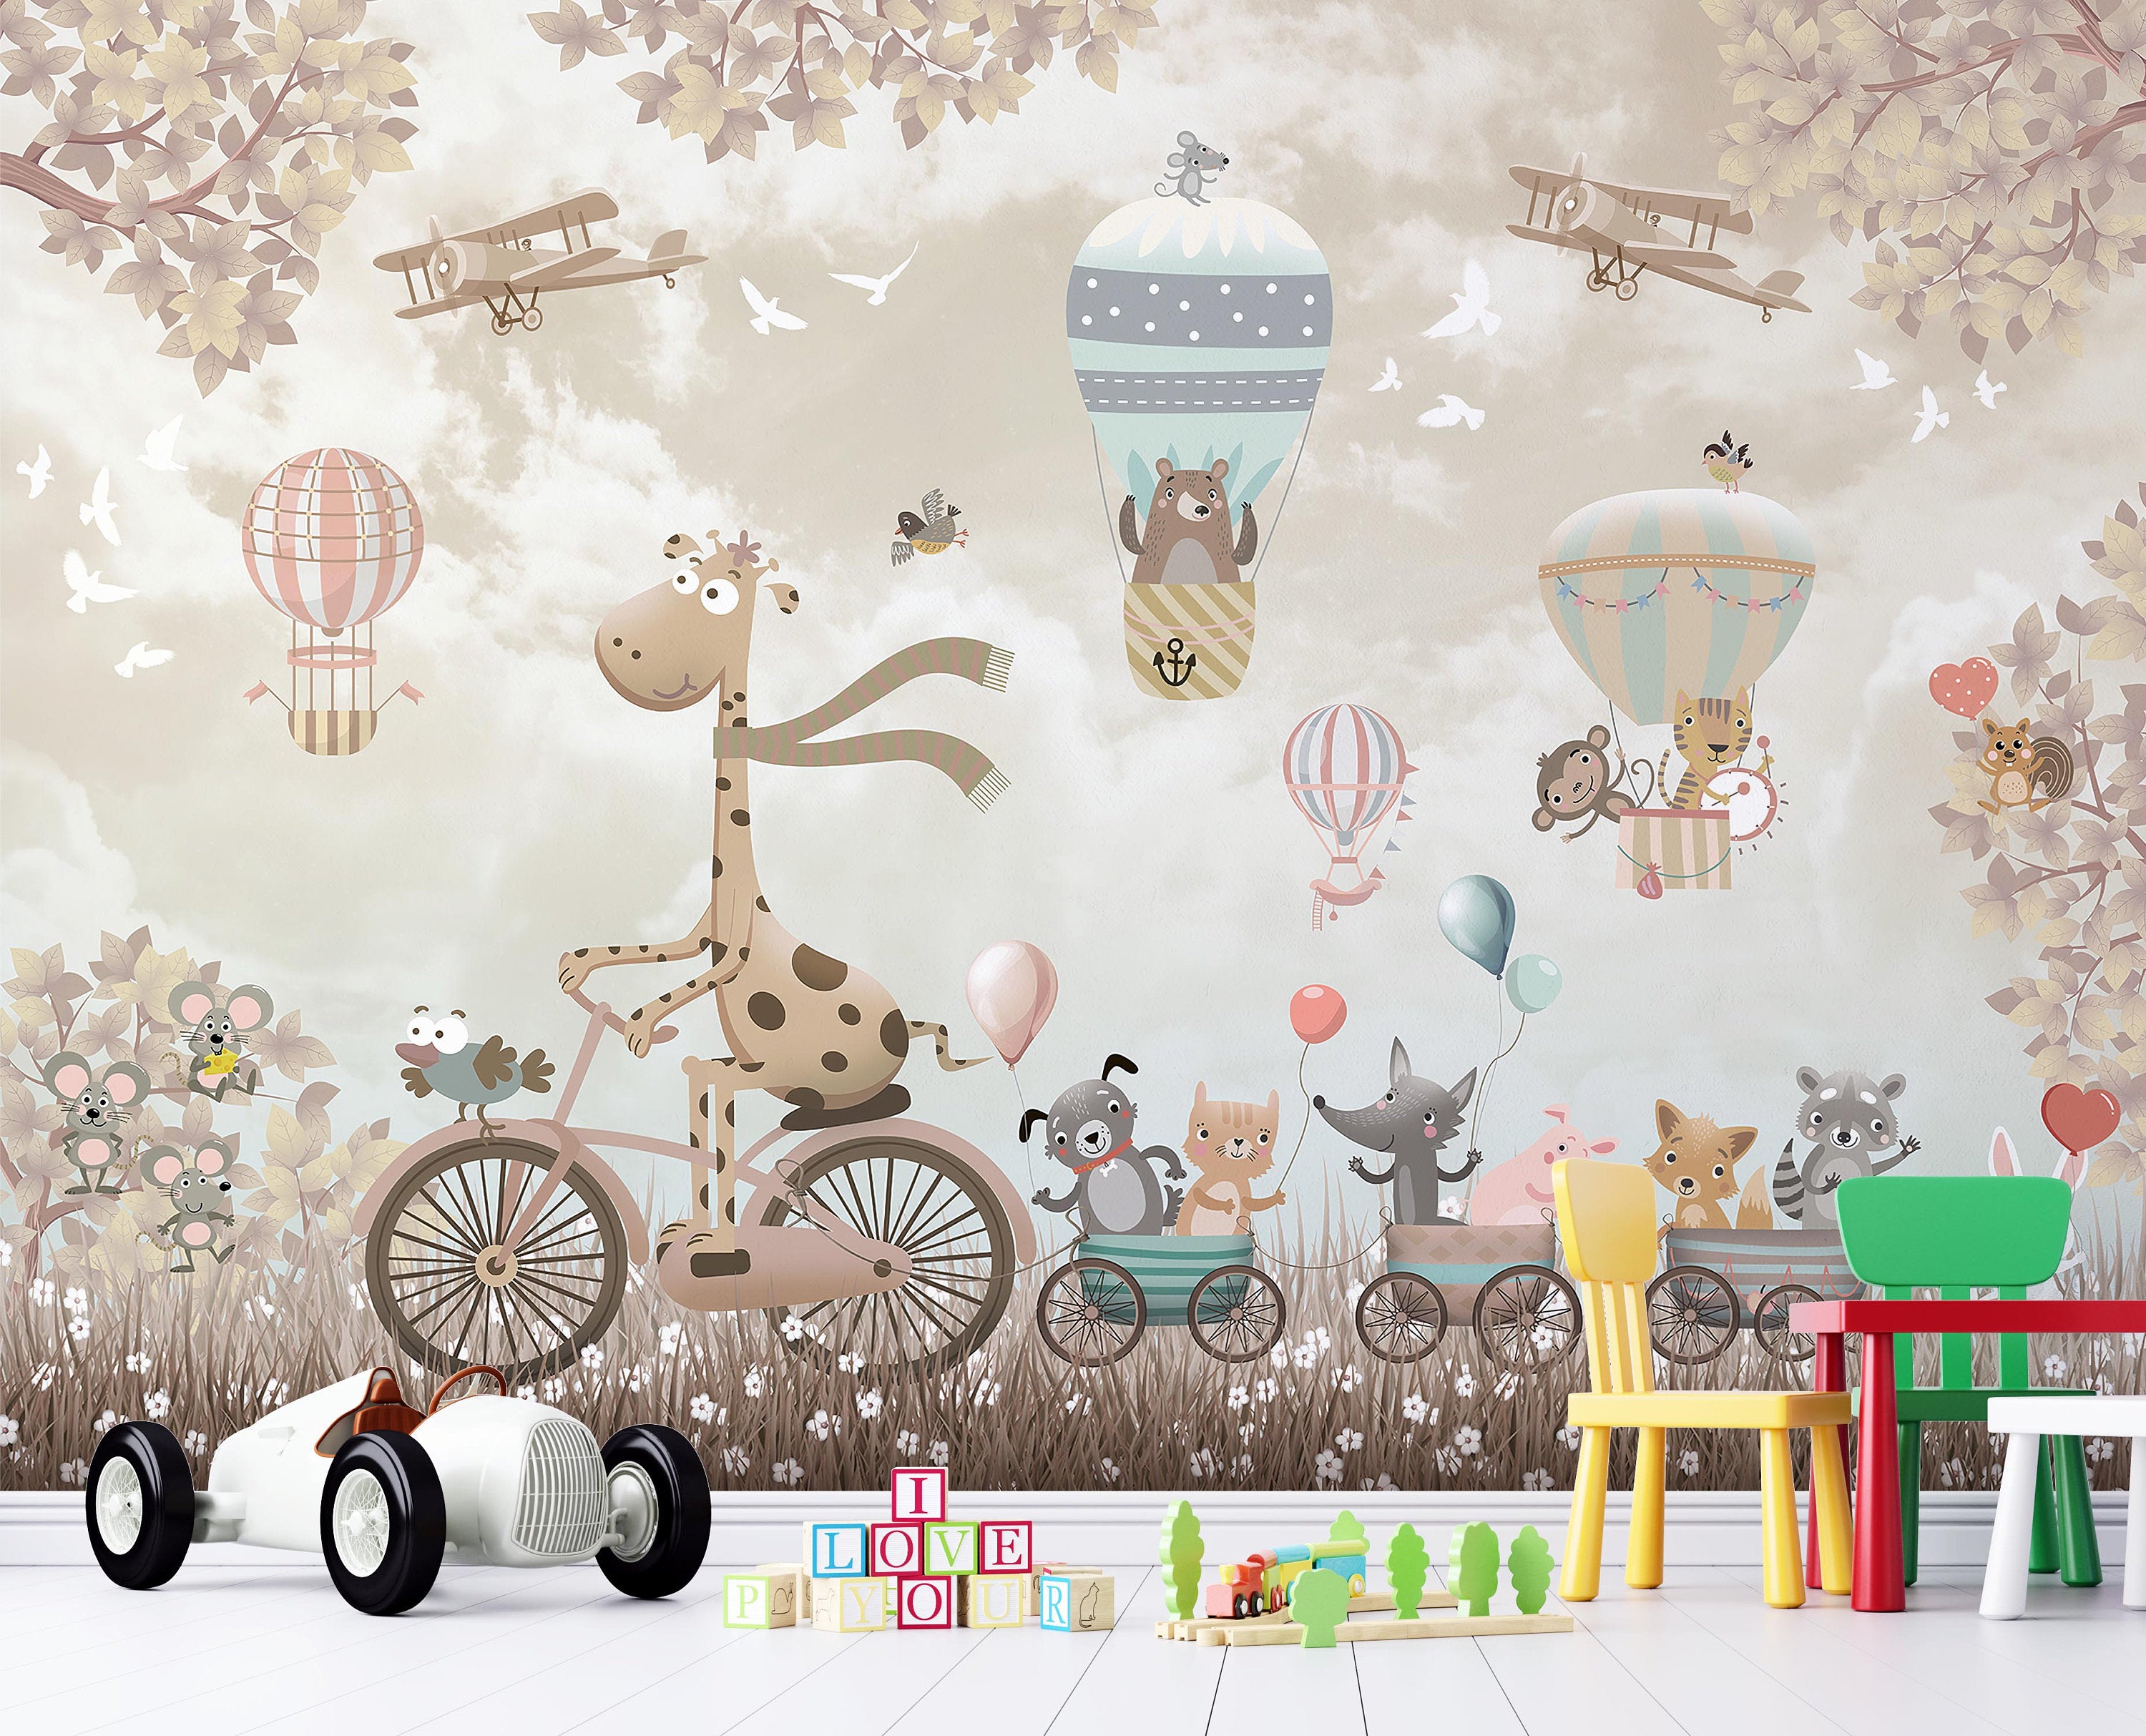 Big Giraffe on Bicycle with Cute Baby Animals Monkey Fox Pig Rabbit Bear Wallpaper Self Adhesive Peel & Stick Wall Decoration Removable